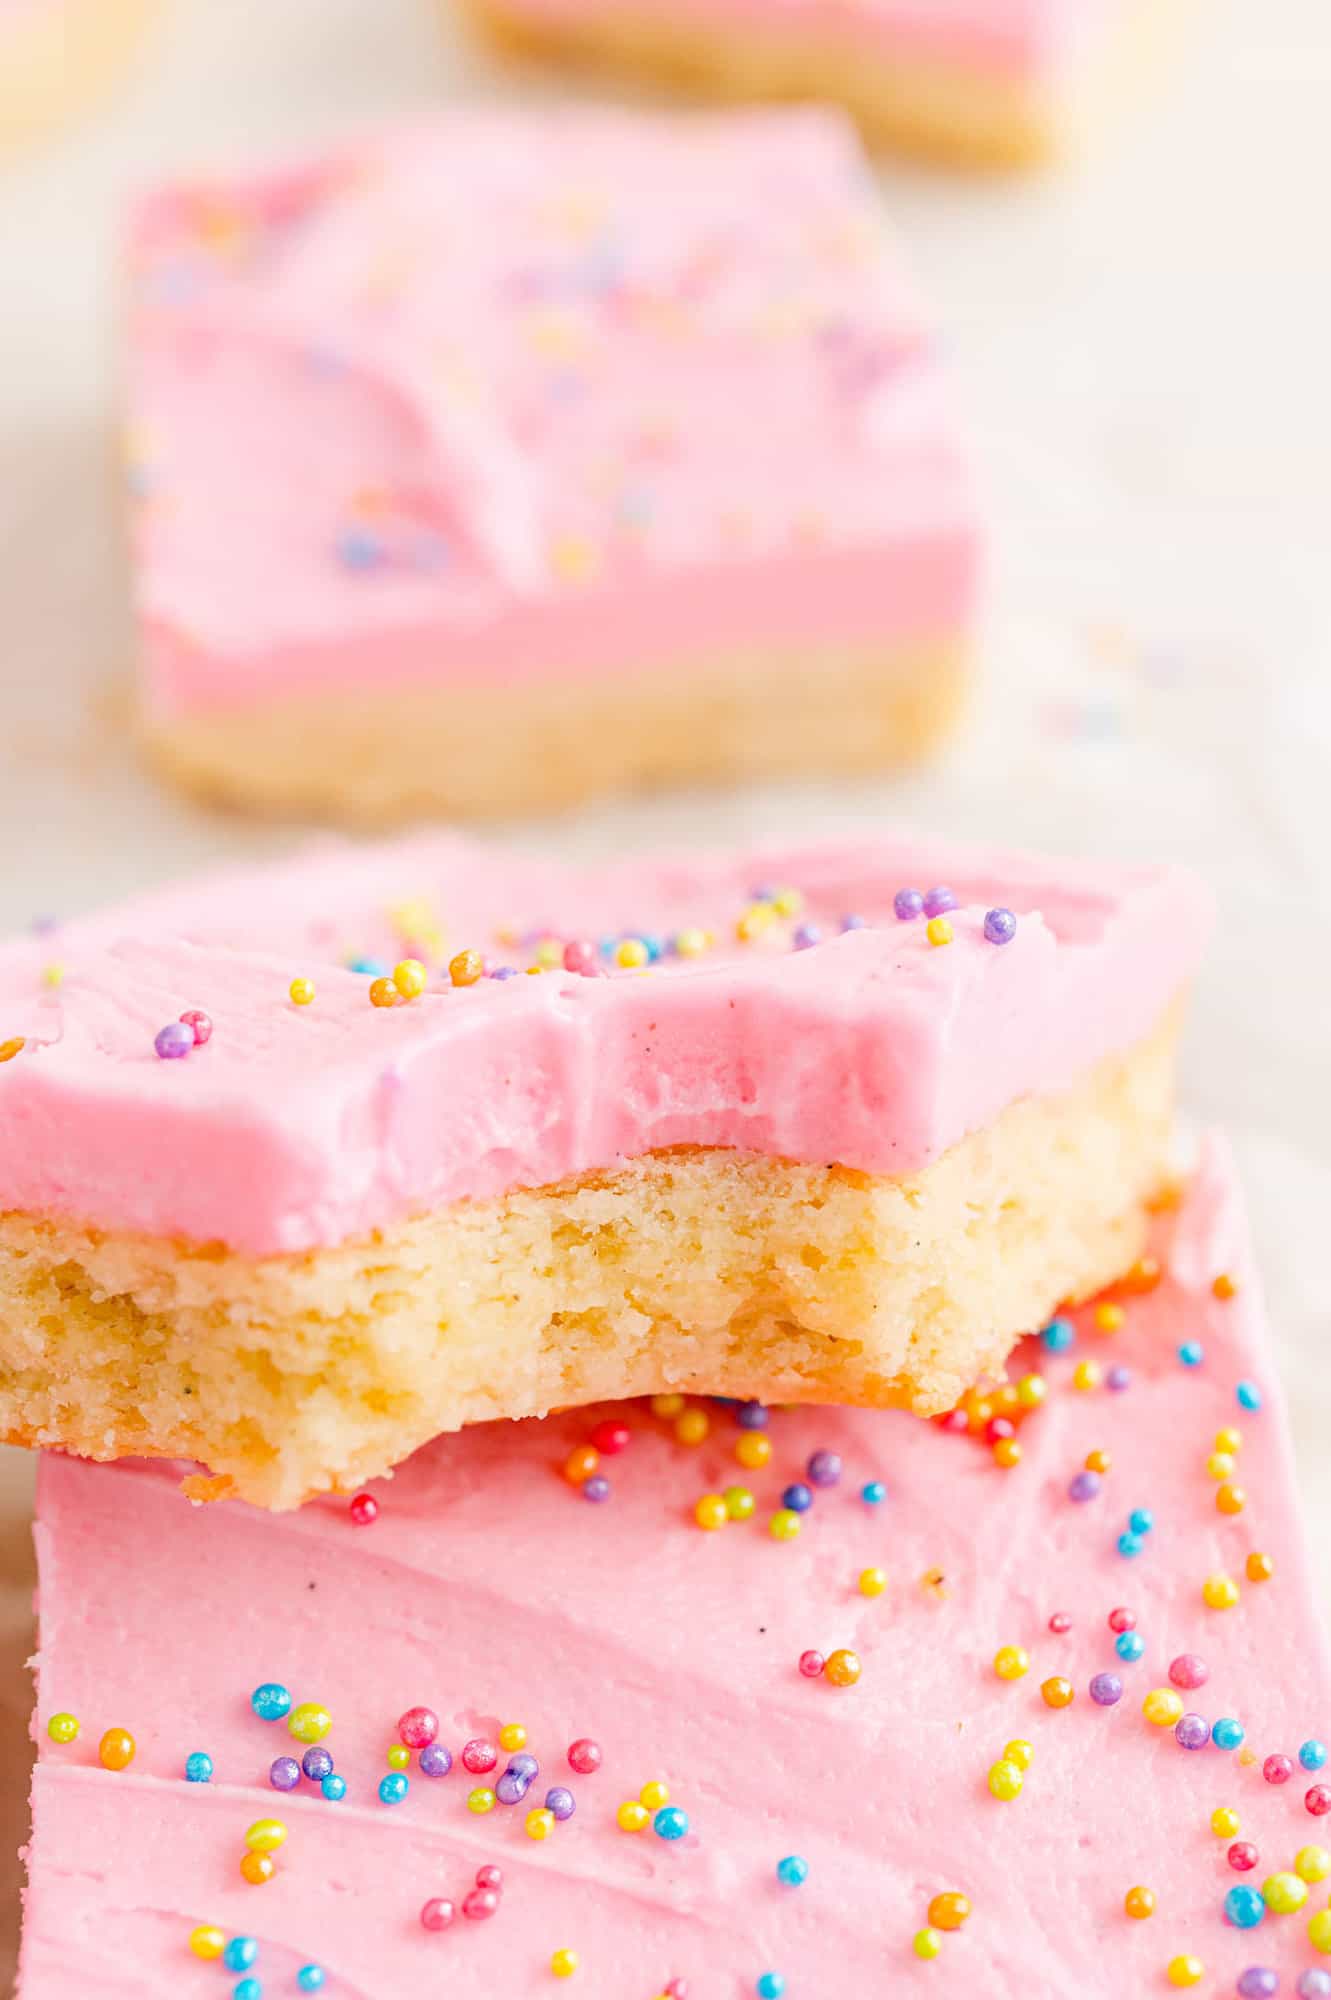 Cookie bar with pink frosting, bite taken out of it to show texture.